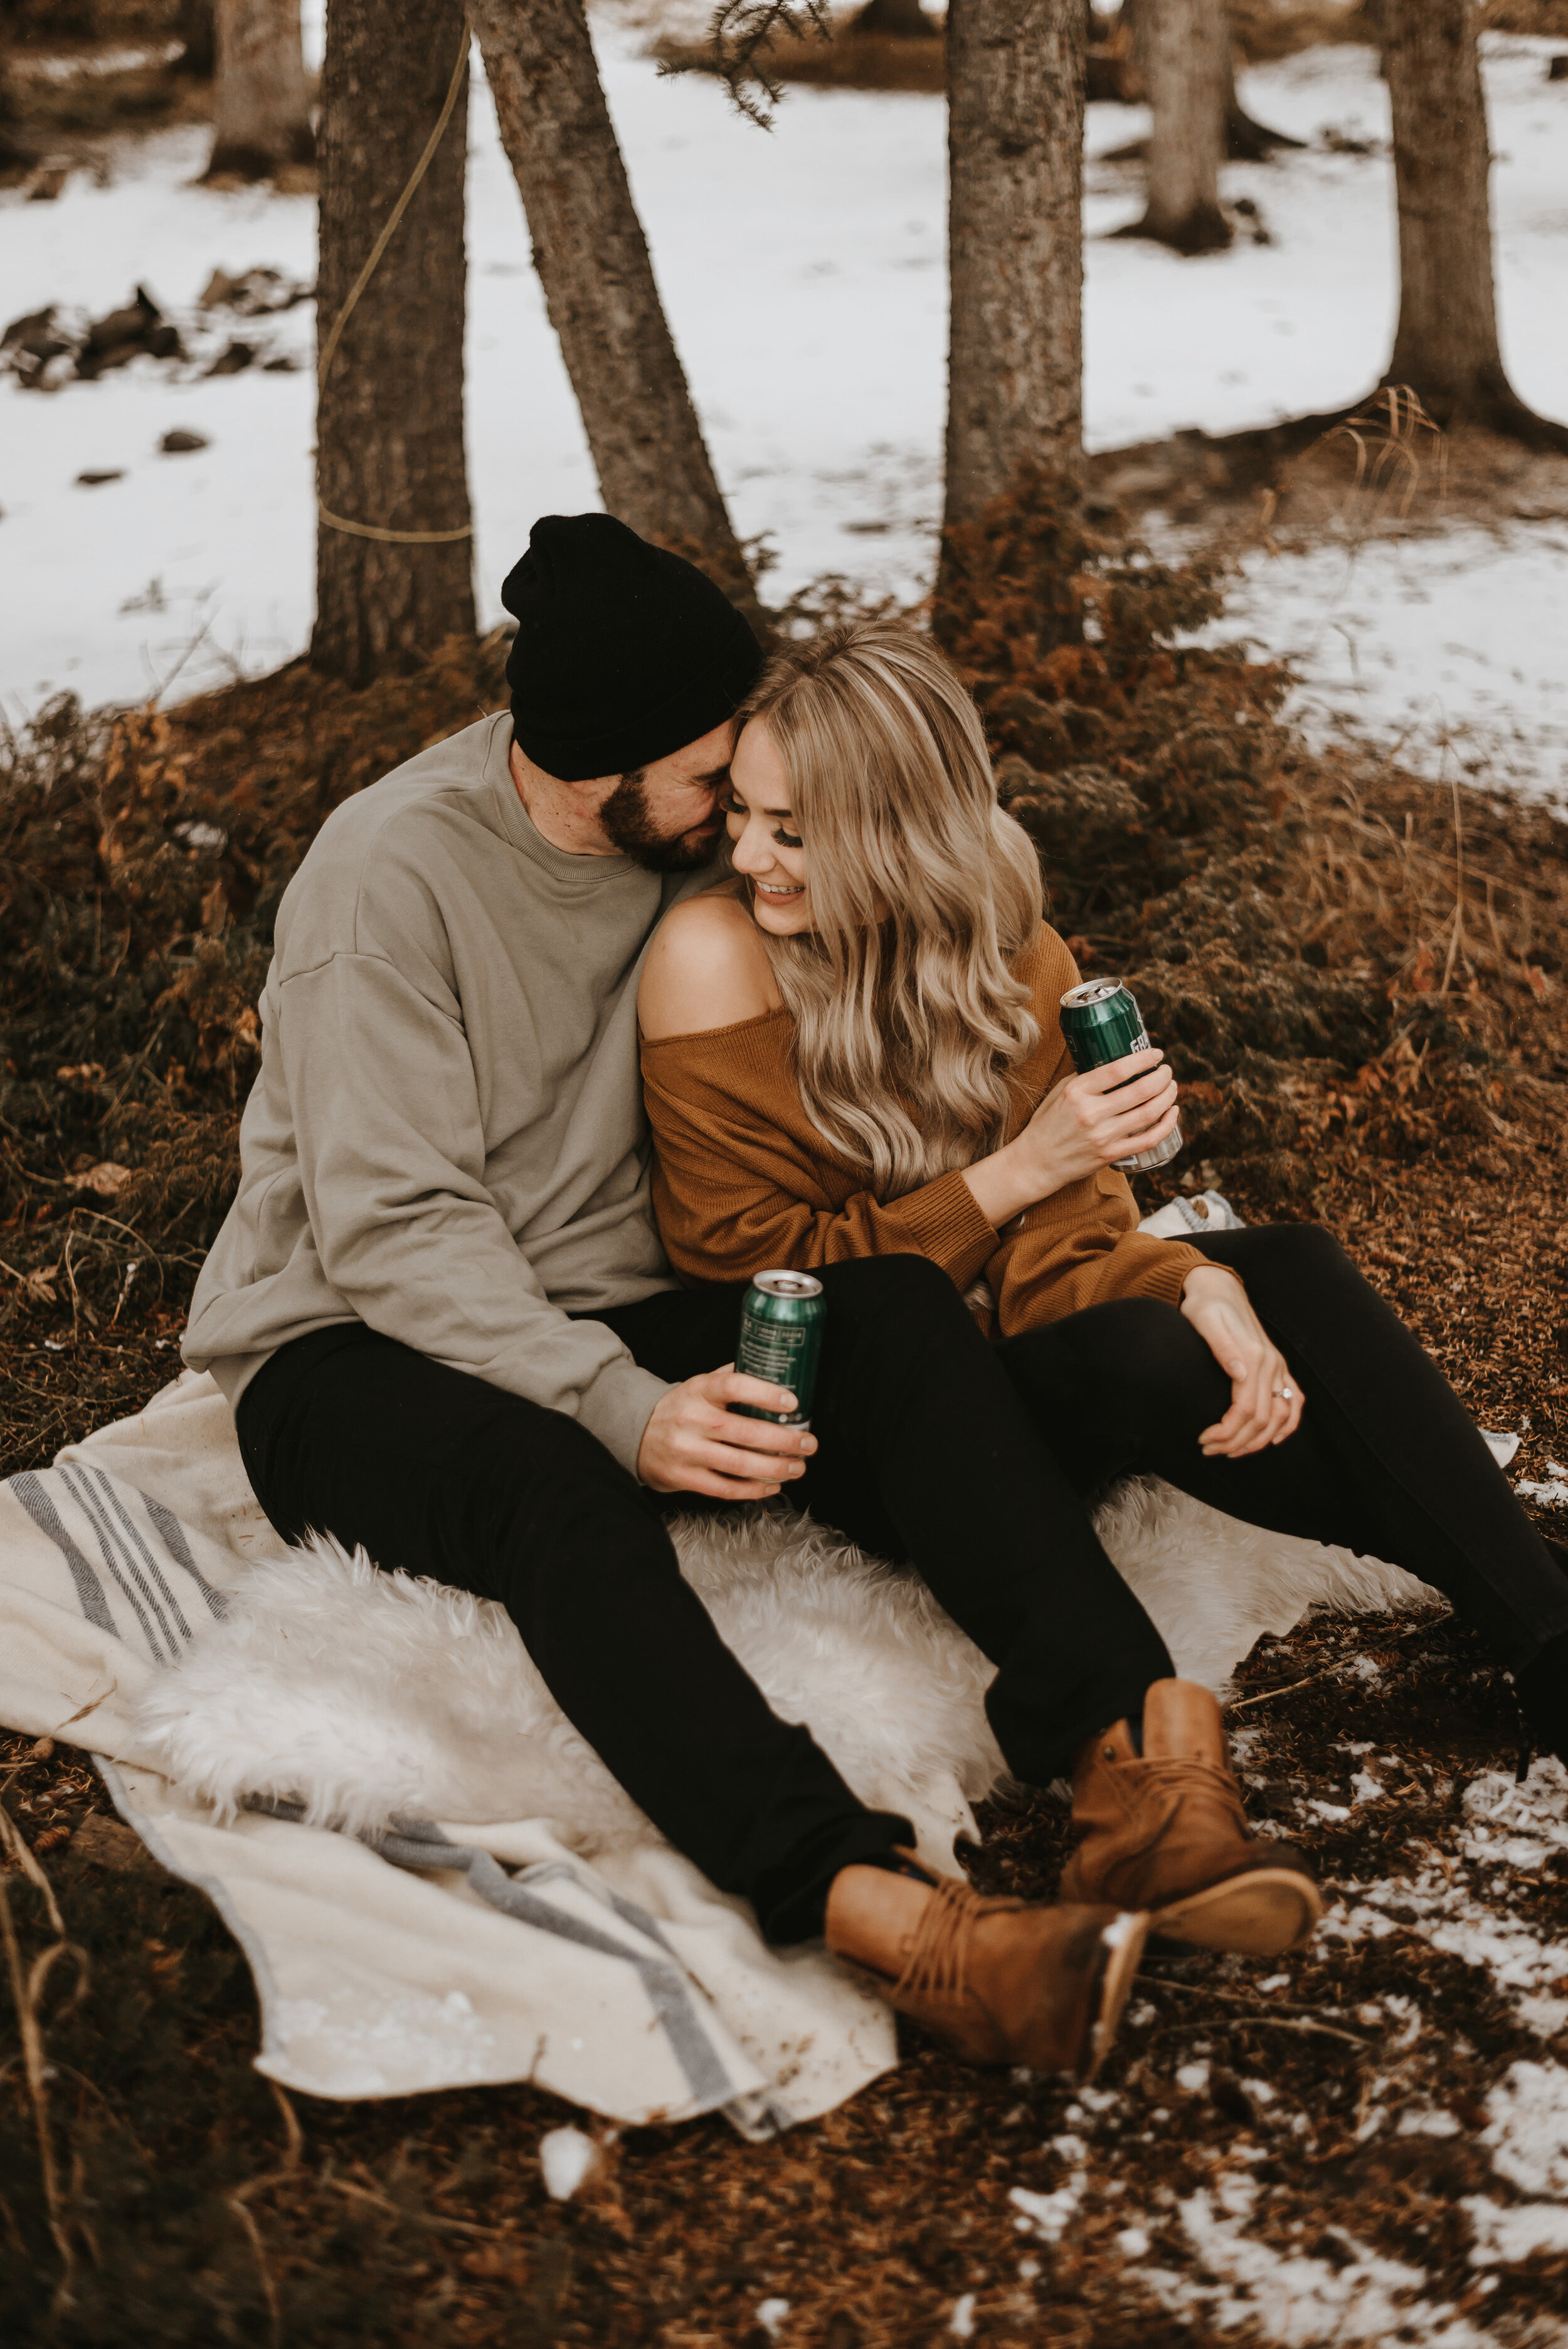 Our Hearts Are Melting Over This Adorably Cozy Winter Engagement ...